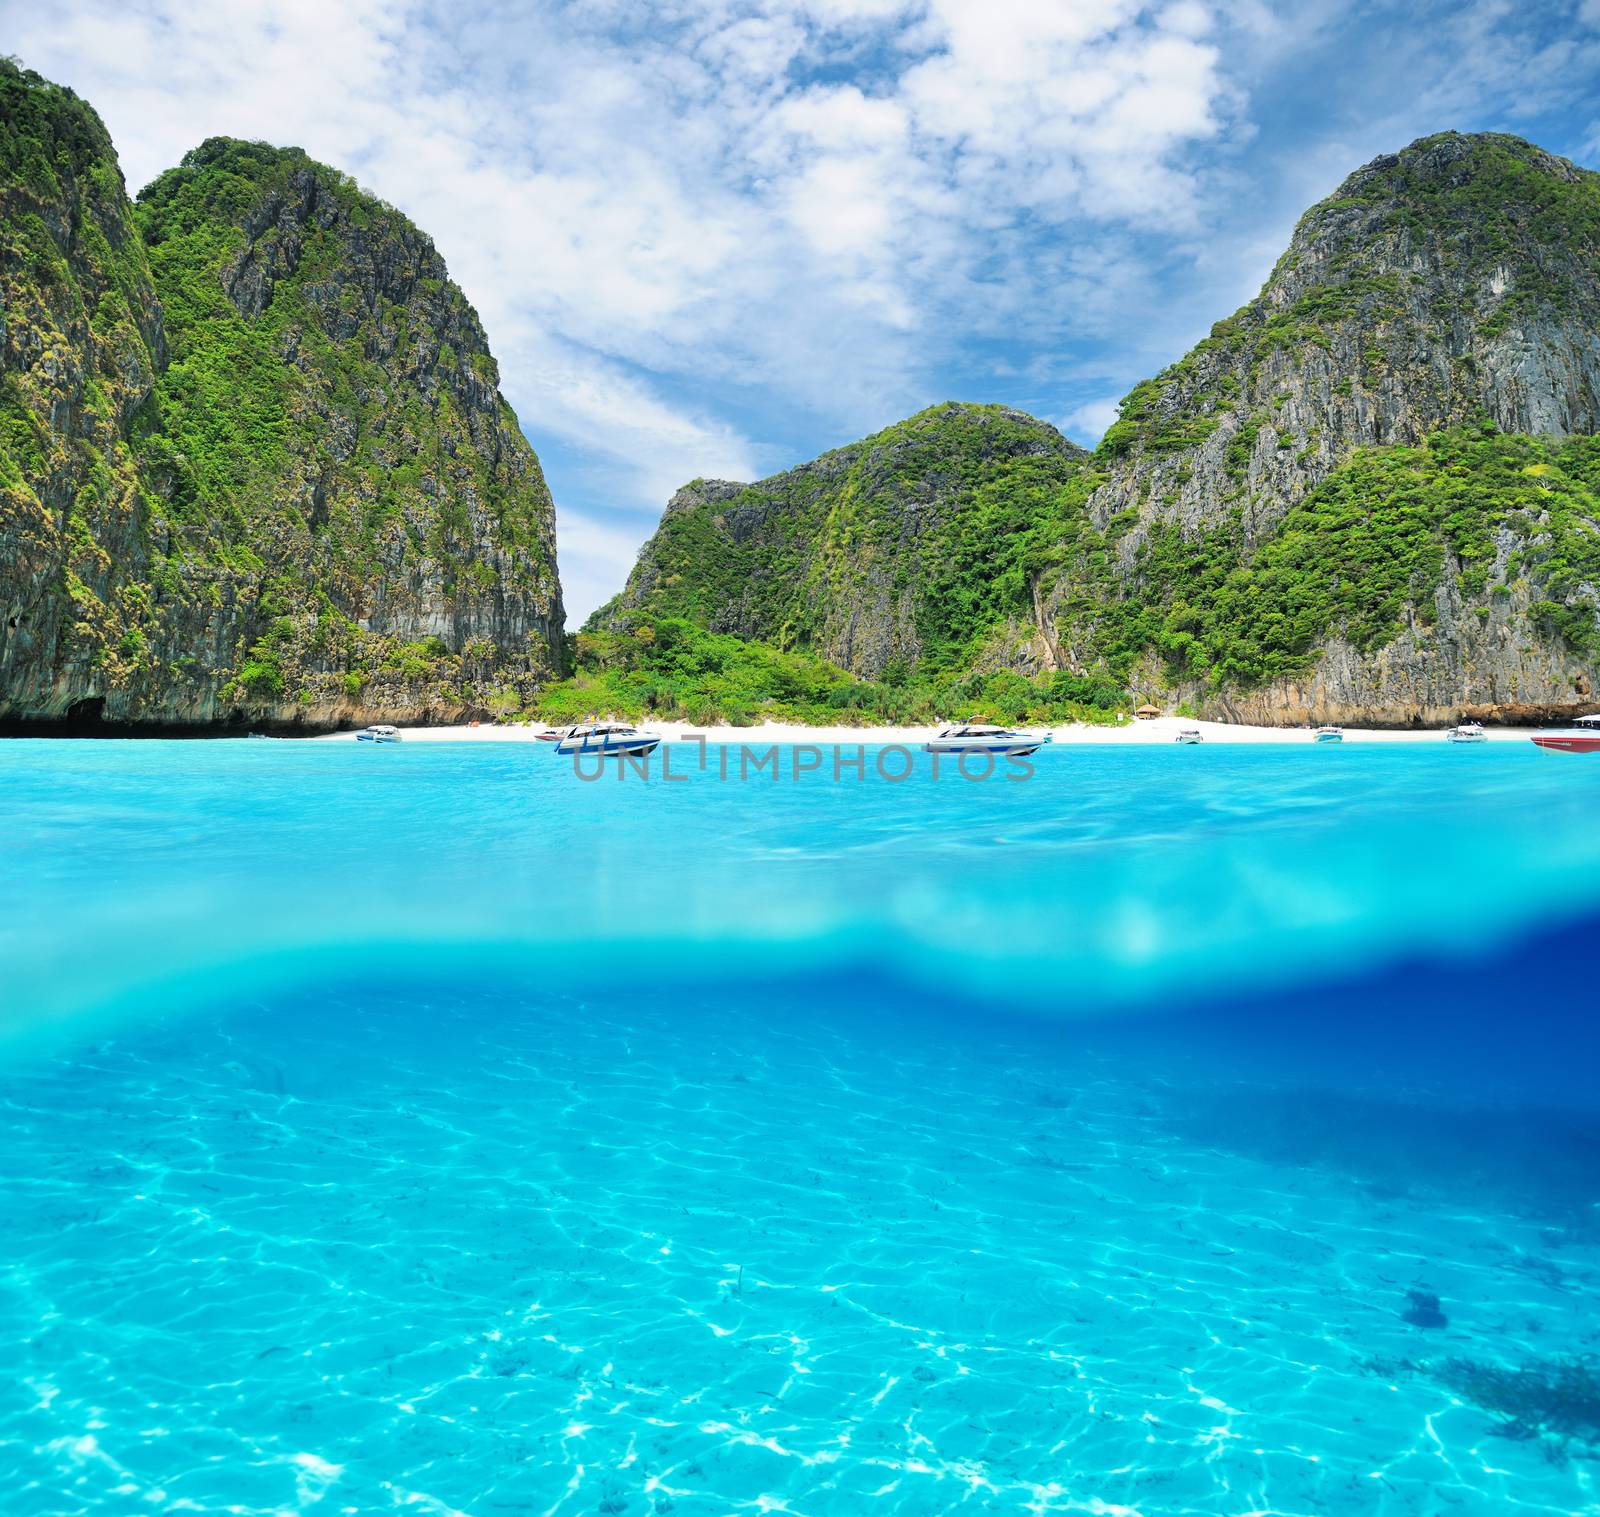 Beautiful lagoon at  Phi Phi Ley island with white sand bottom underwater and above water split view